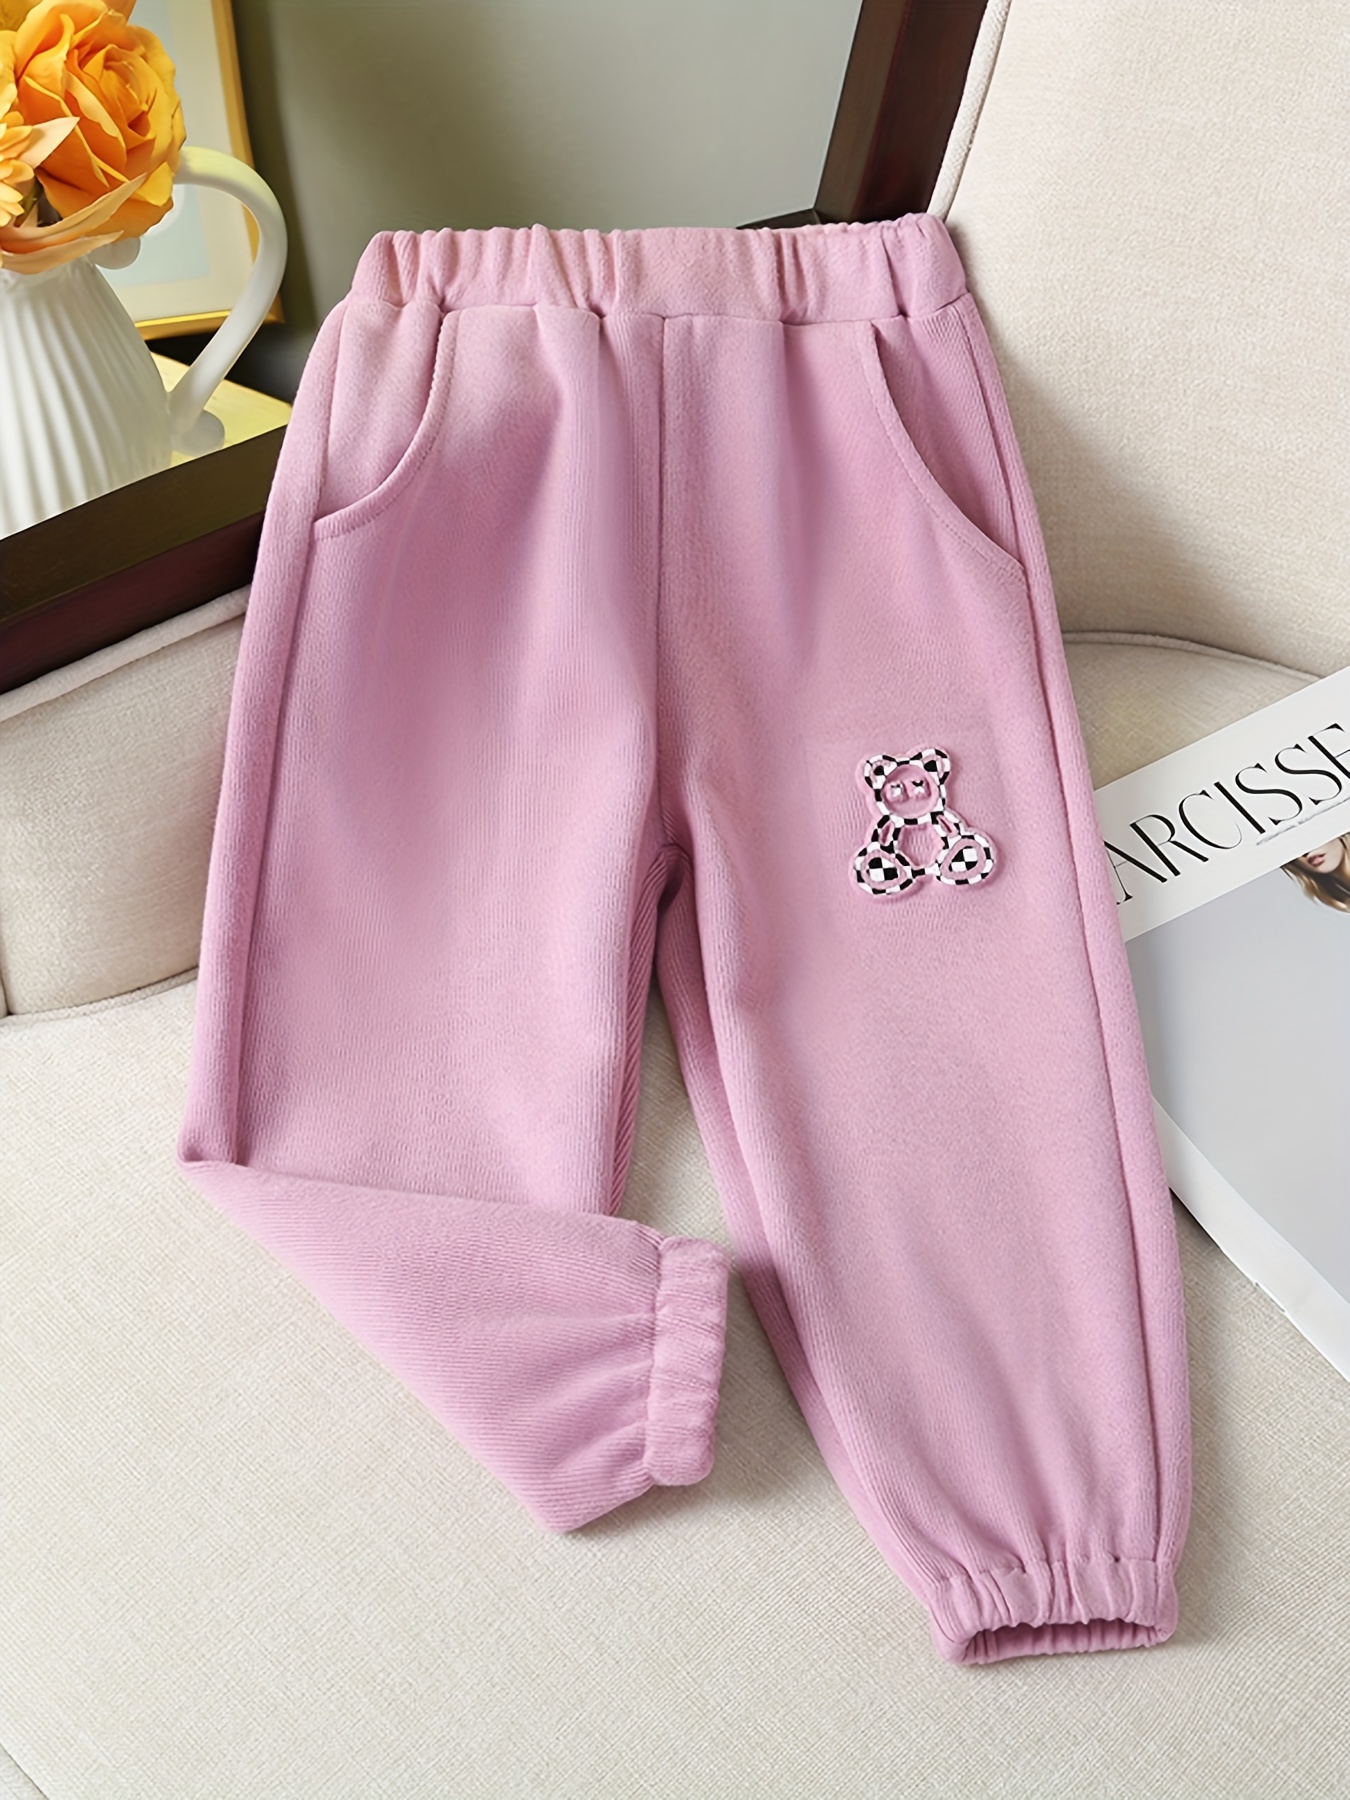 Relaxed-fit Sweatpants Jogger With Pockets, Women's Comfy